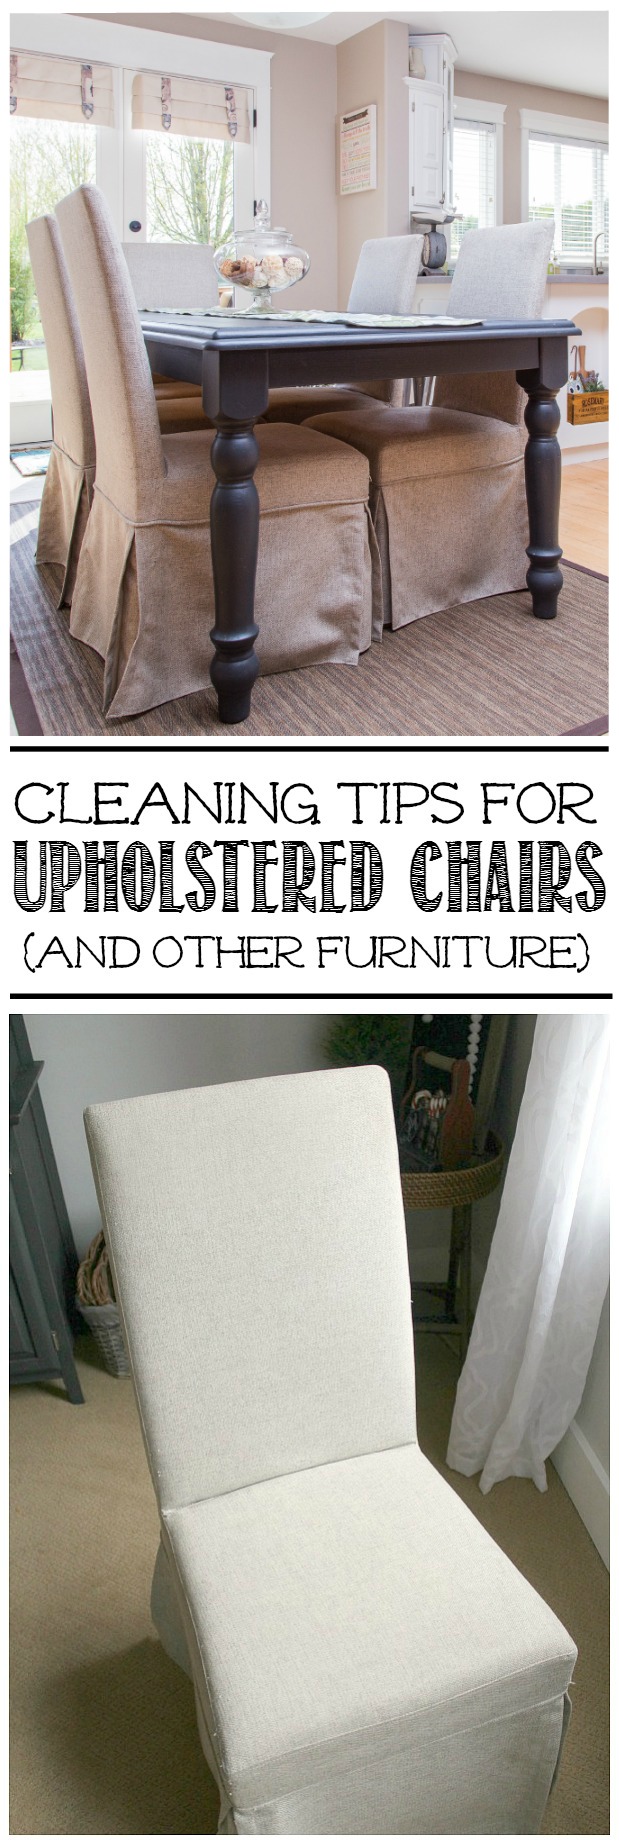 How To Clean Upholstered Chairs, How To Clean Fabric Covered Dining Room Chairs